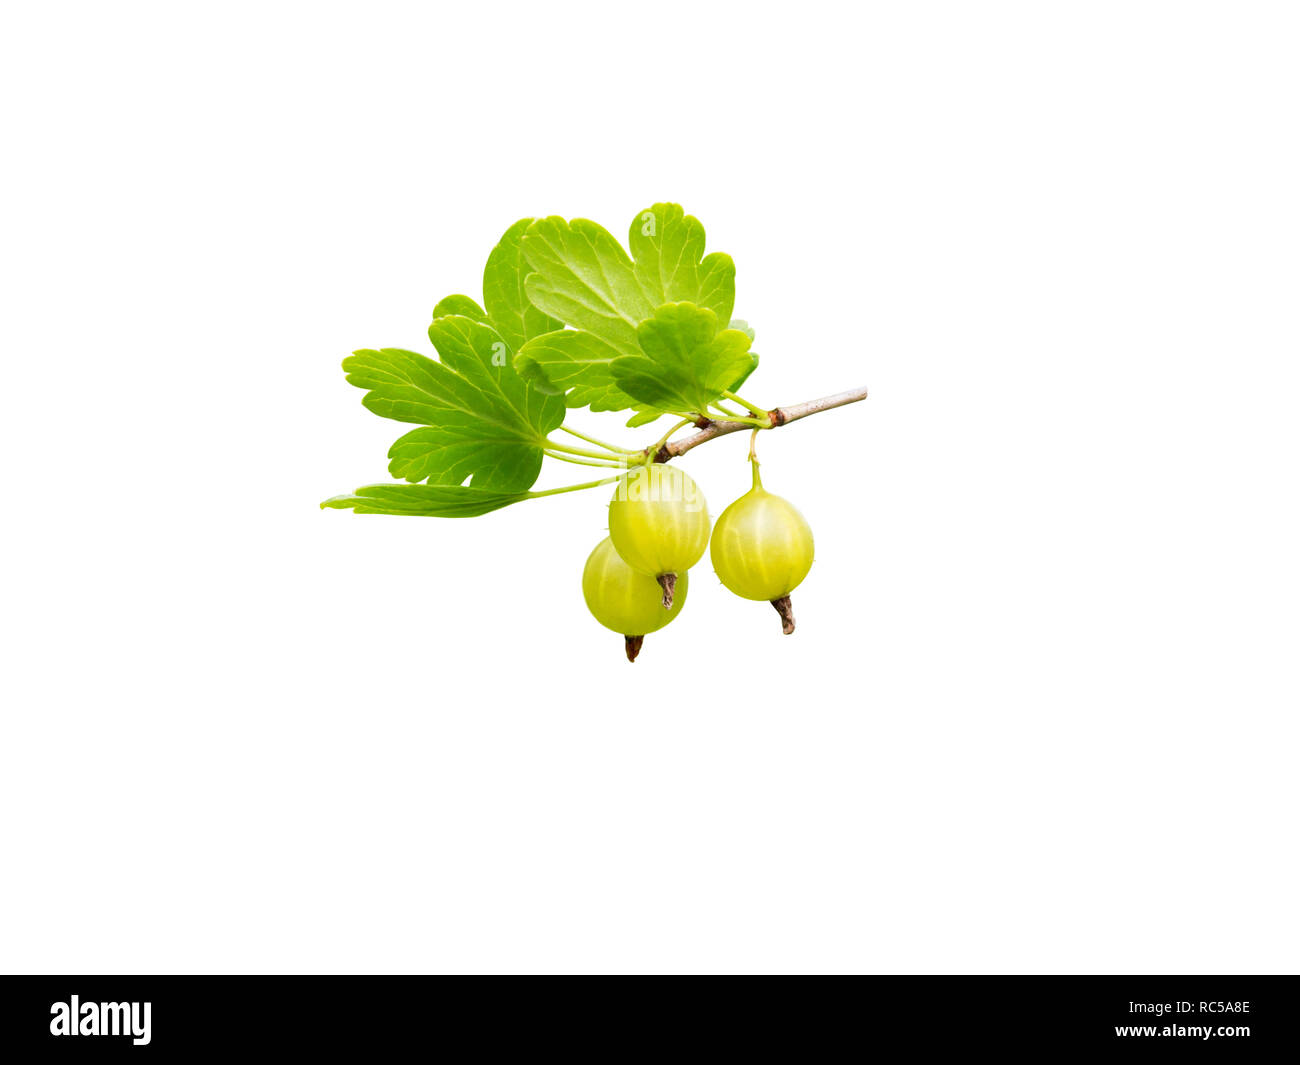 Gooseberry ripe yellow berries and green leaves isolated on white. Stock Photo